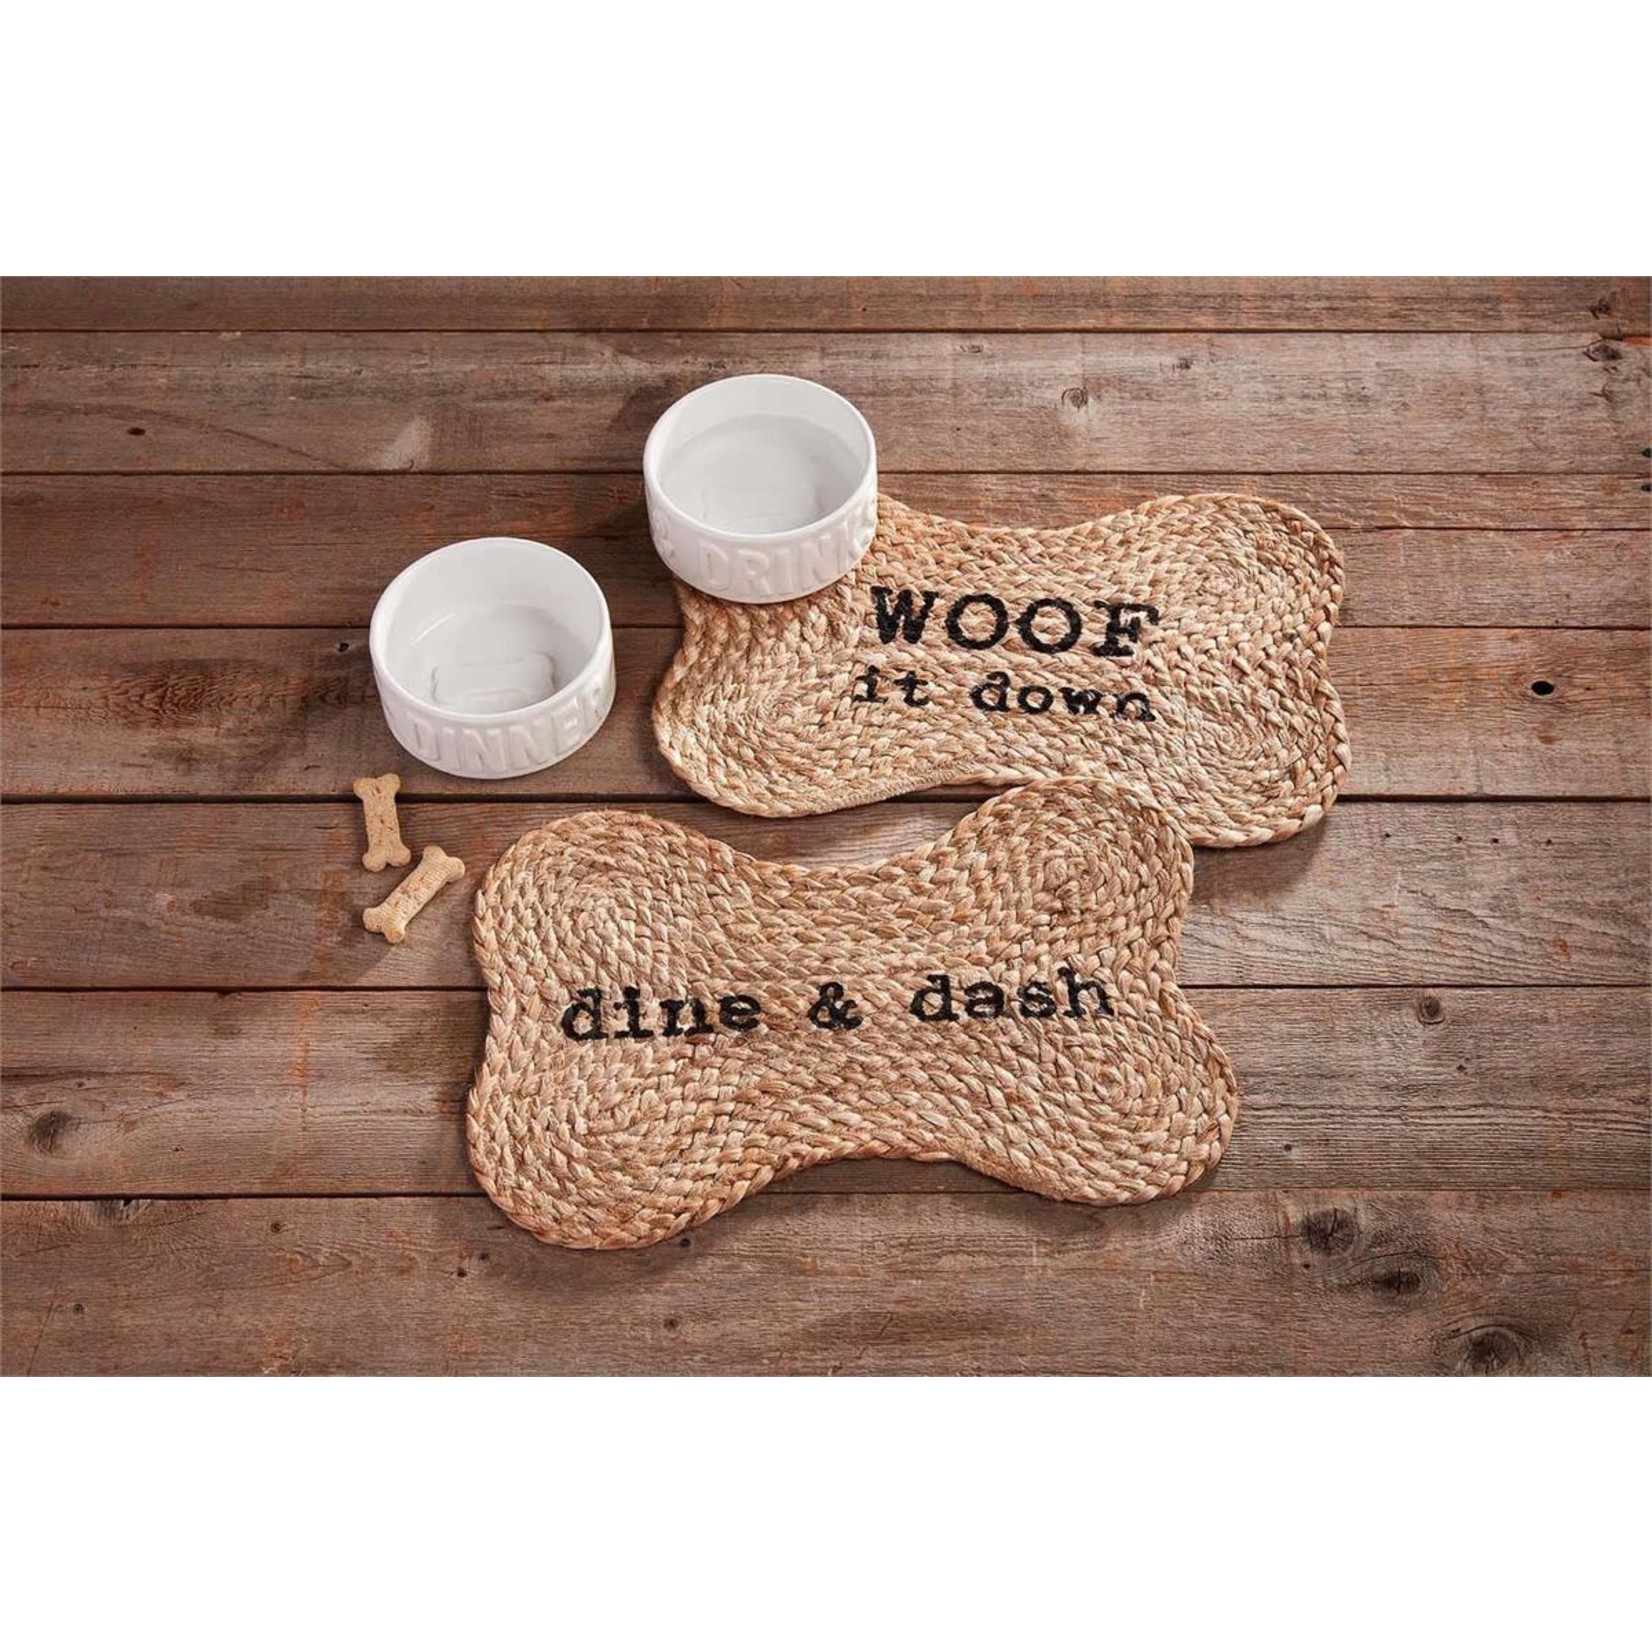 MUD PIE Dogs Welcome Paw Print Mat 